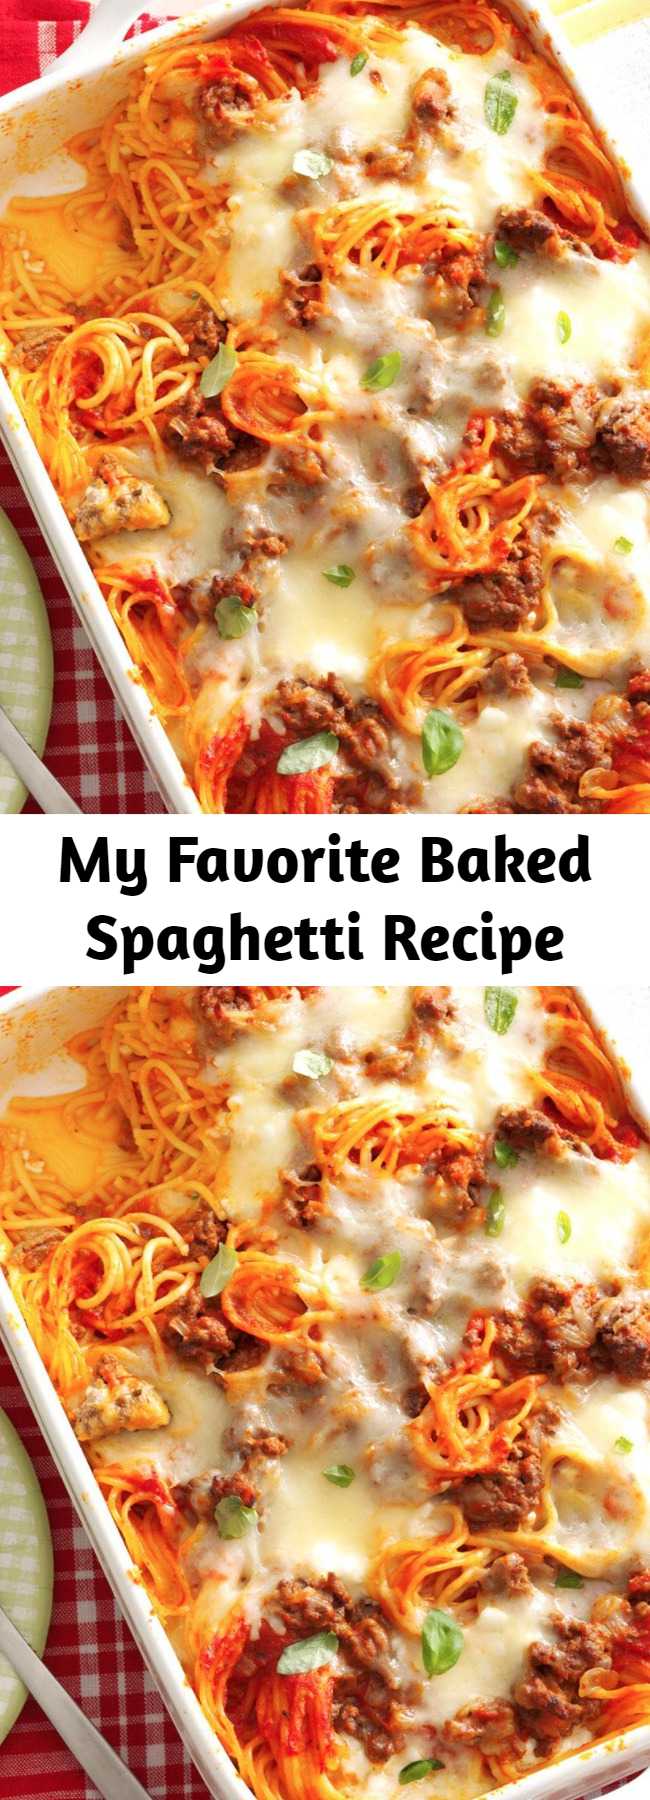 My Favorite Baked Spaghetti Recipe - This yummy baked spaghetti casserole will be requested again and again for potlucks and family gatherings. It's especially popular with my grandchildren, who just love baked spaghetti with all the cheese.